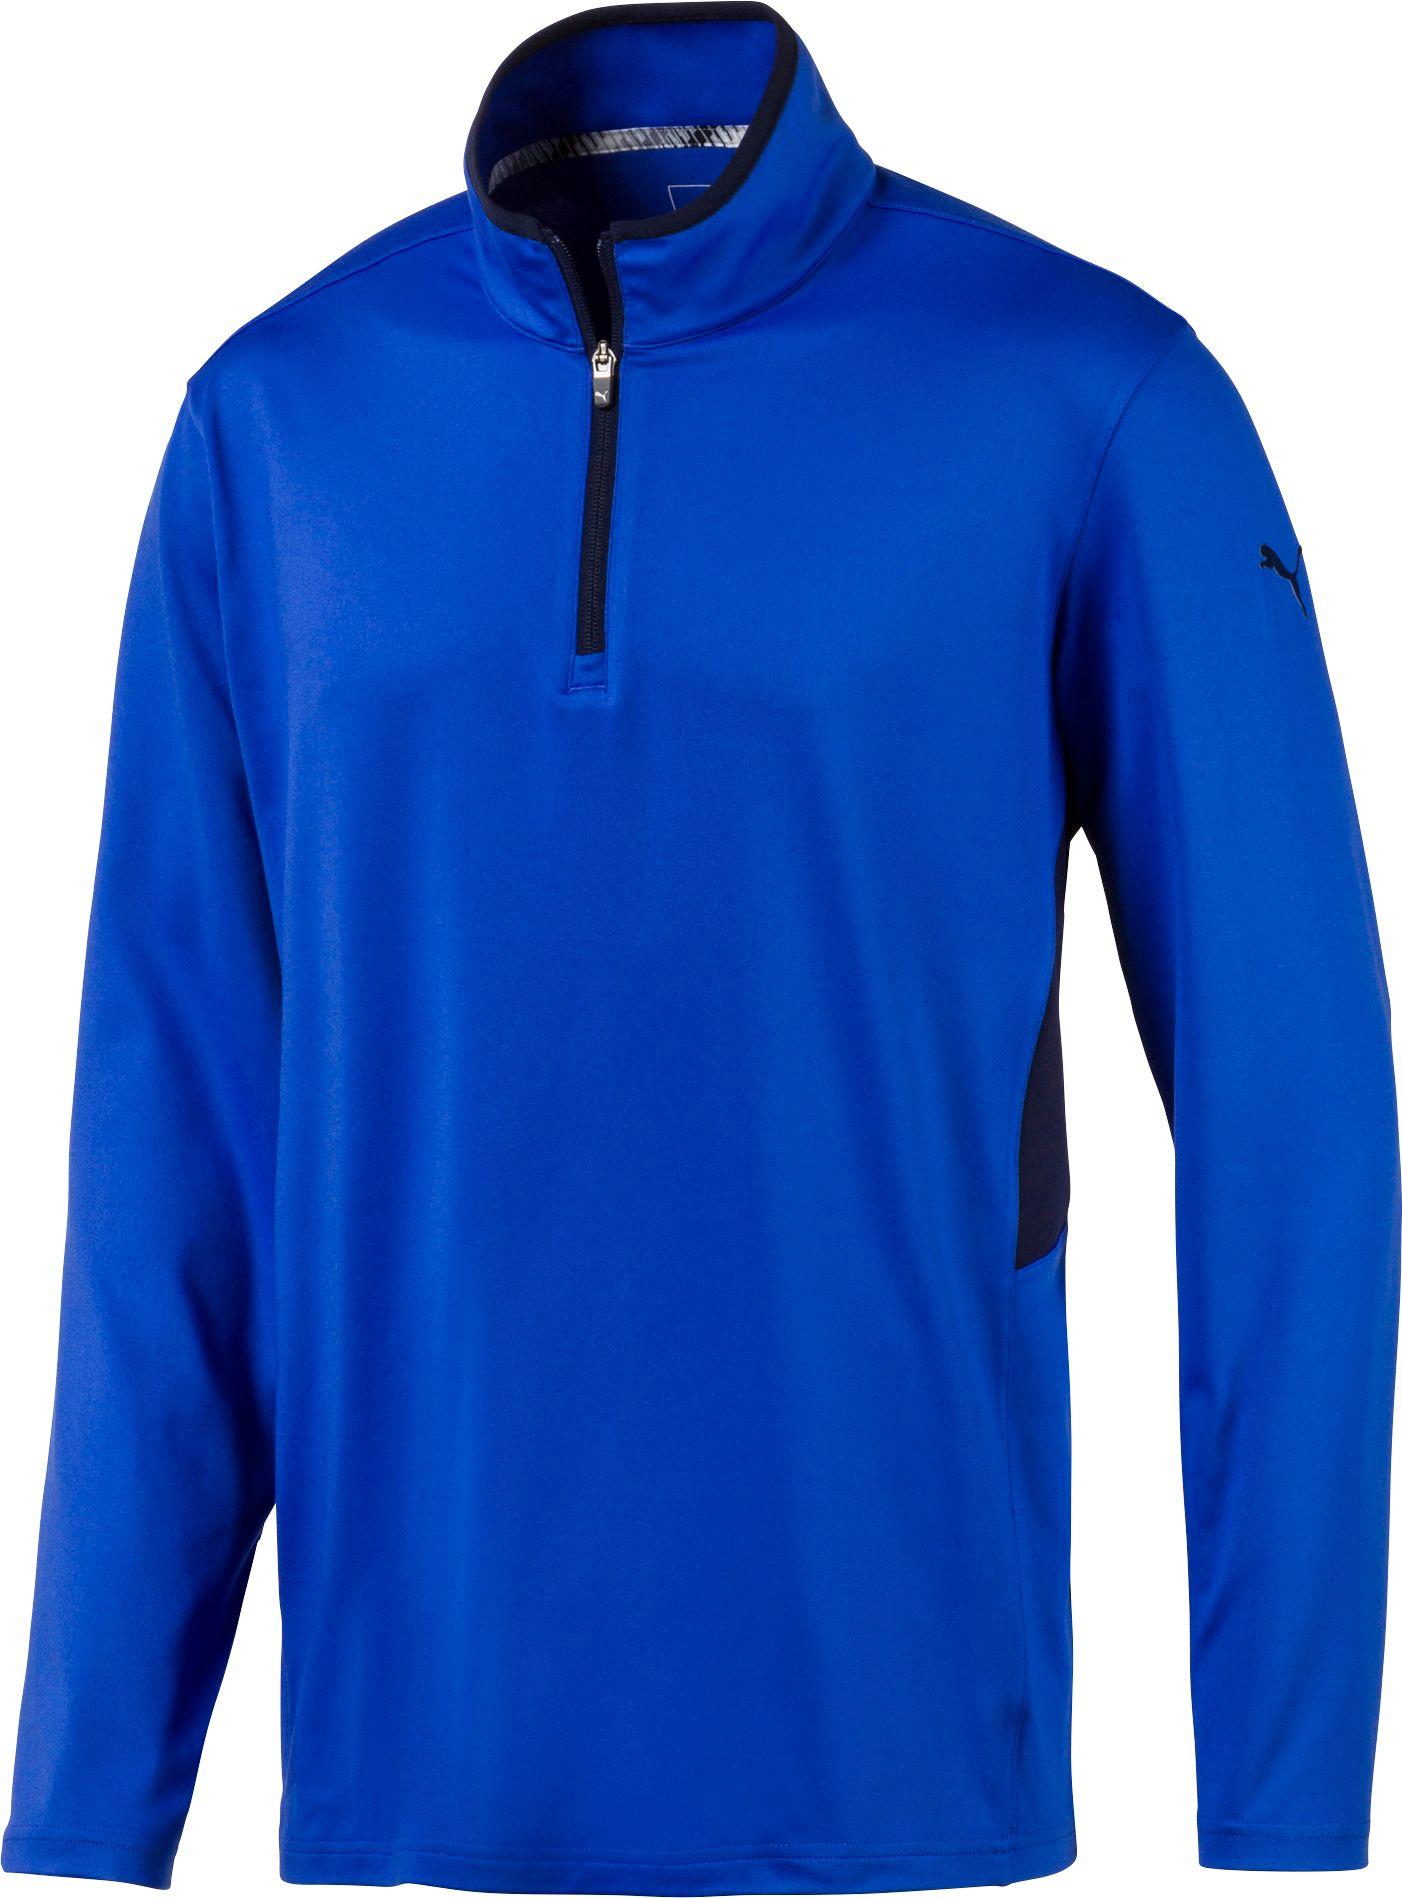 PUMA Rotation 1⁄4 Zip Golf Pullover in Blue for Men - Lyst